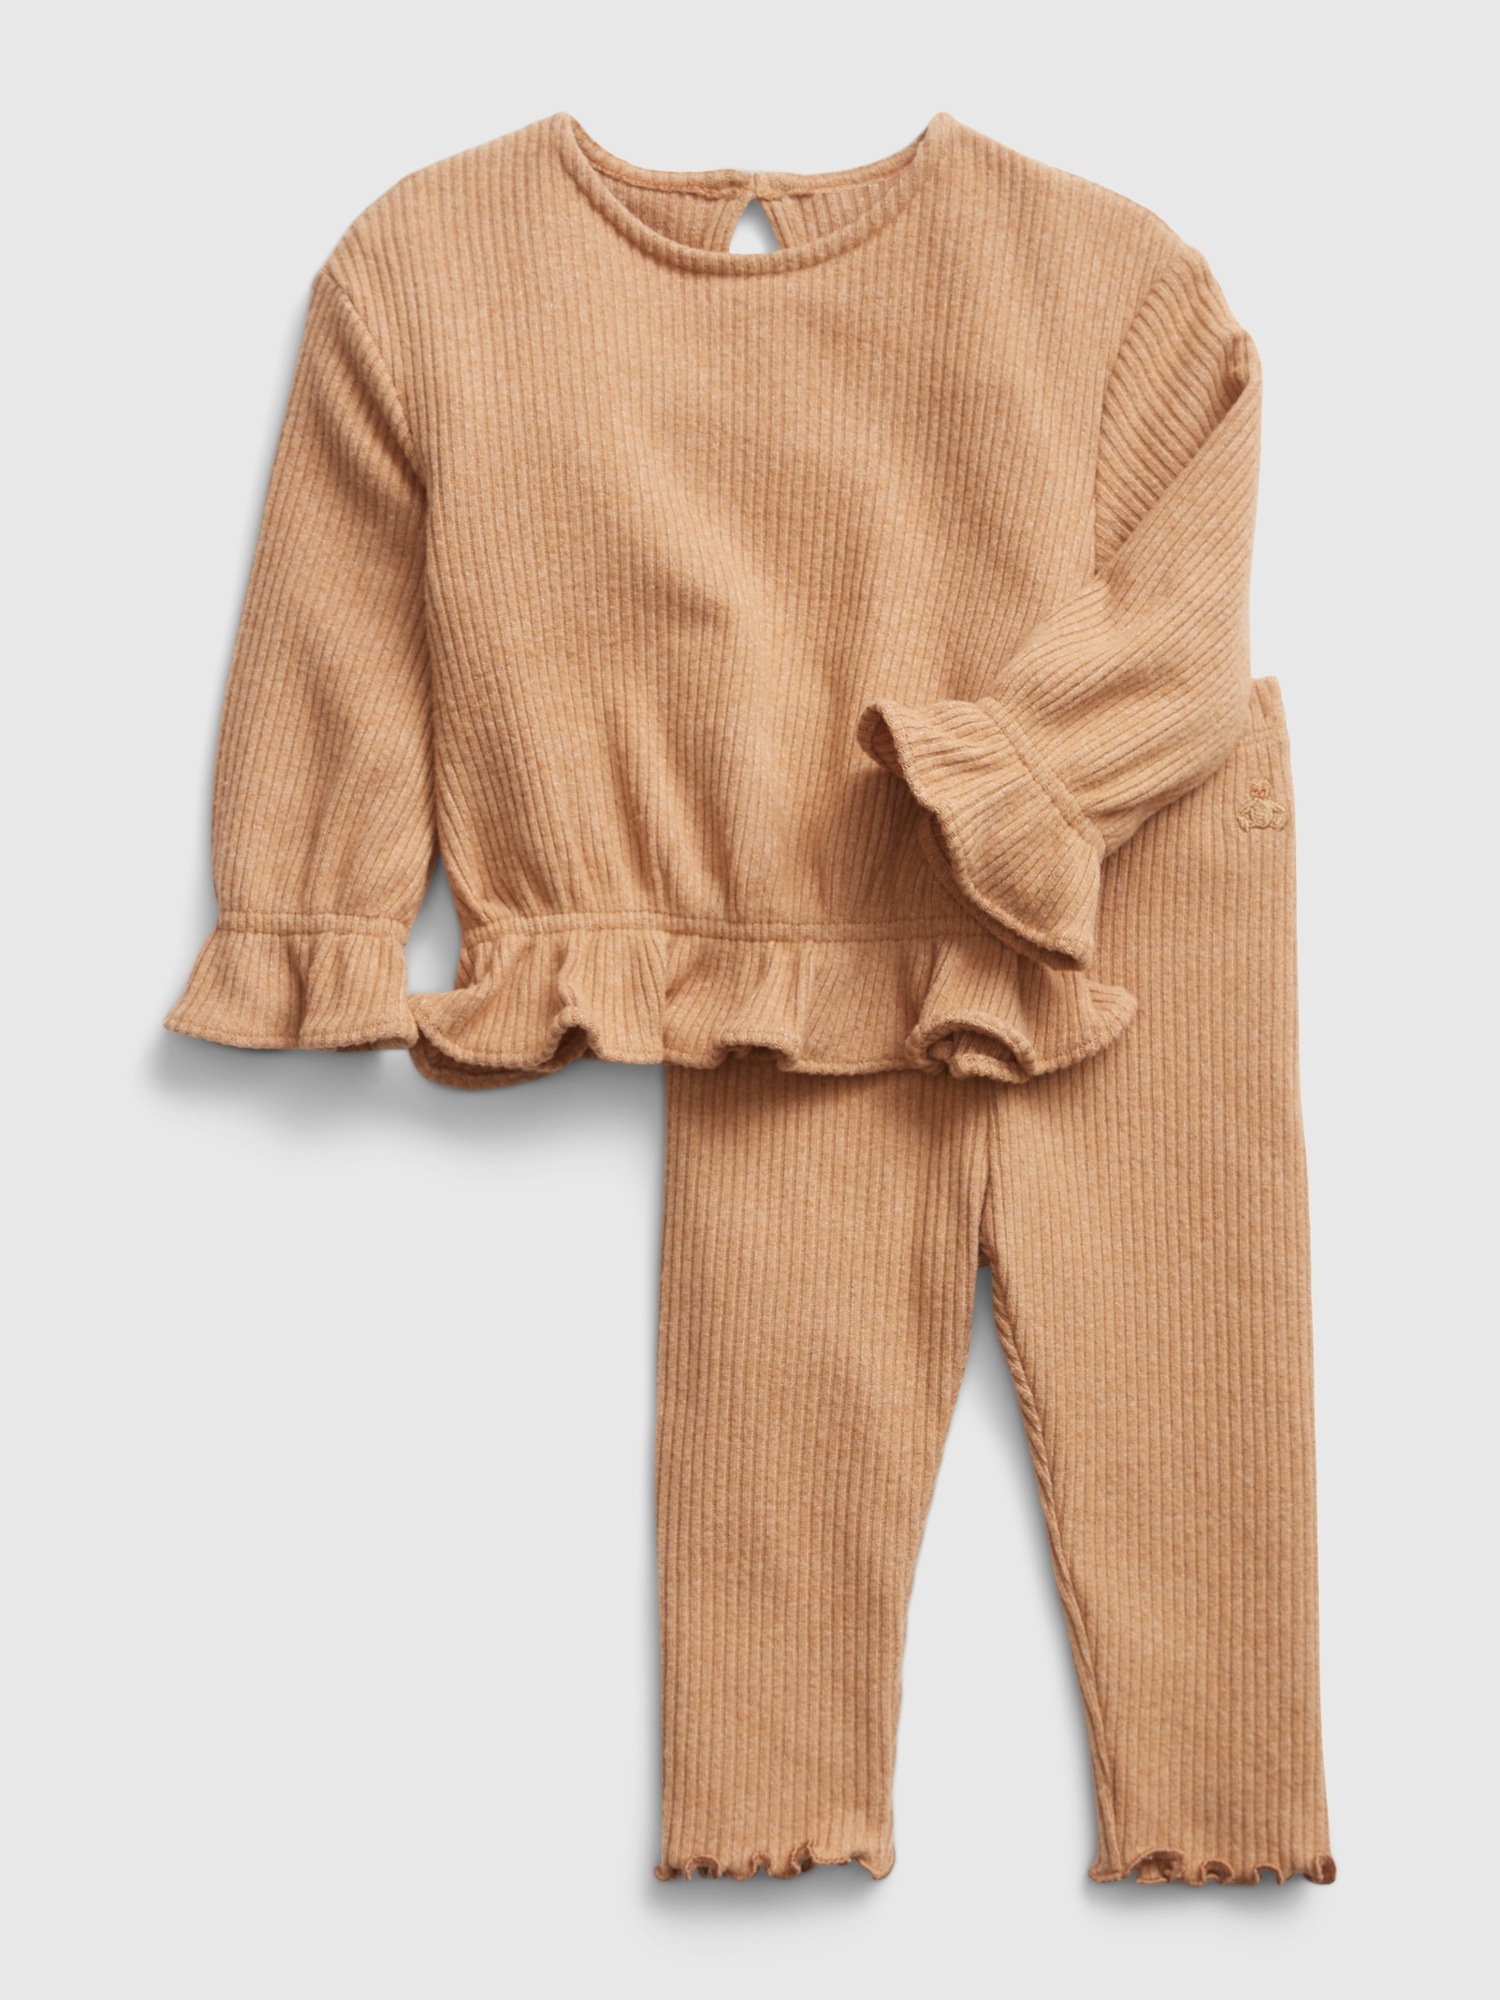 Gap Baby Rib Two-Piece Outfit Set brown. 1